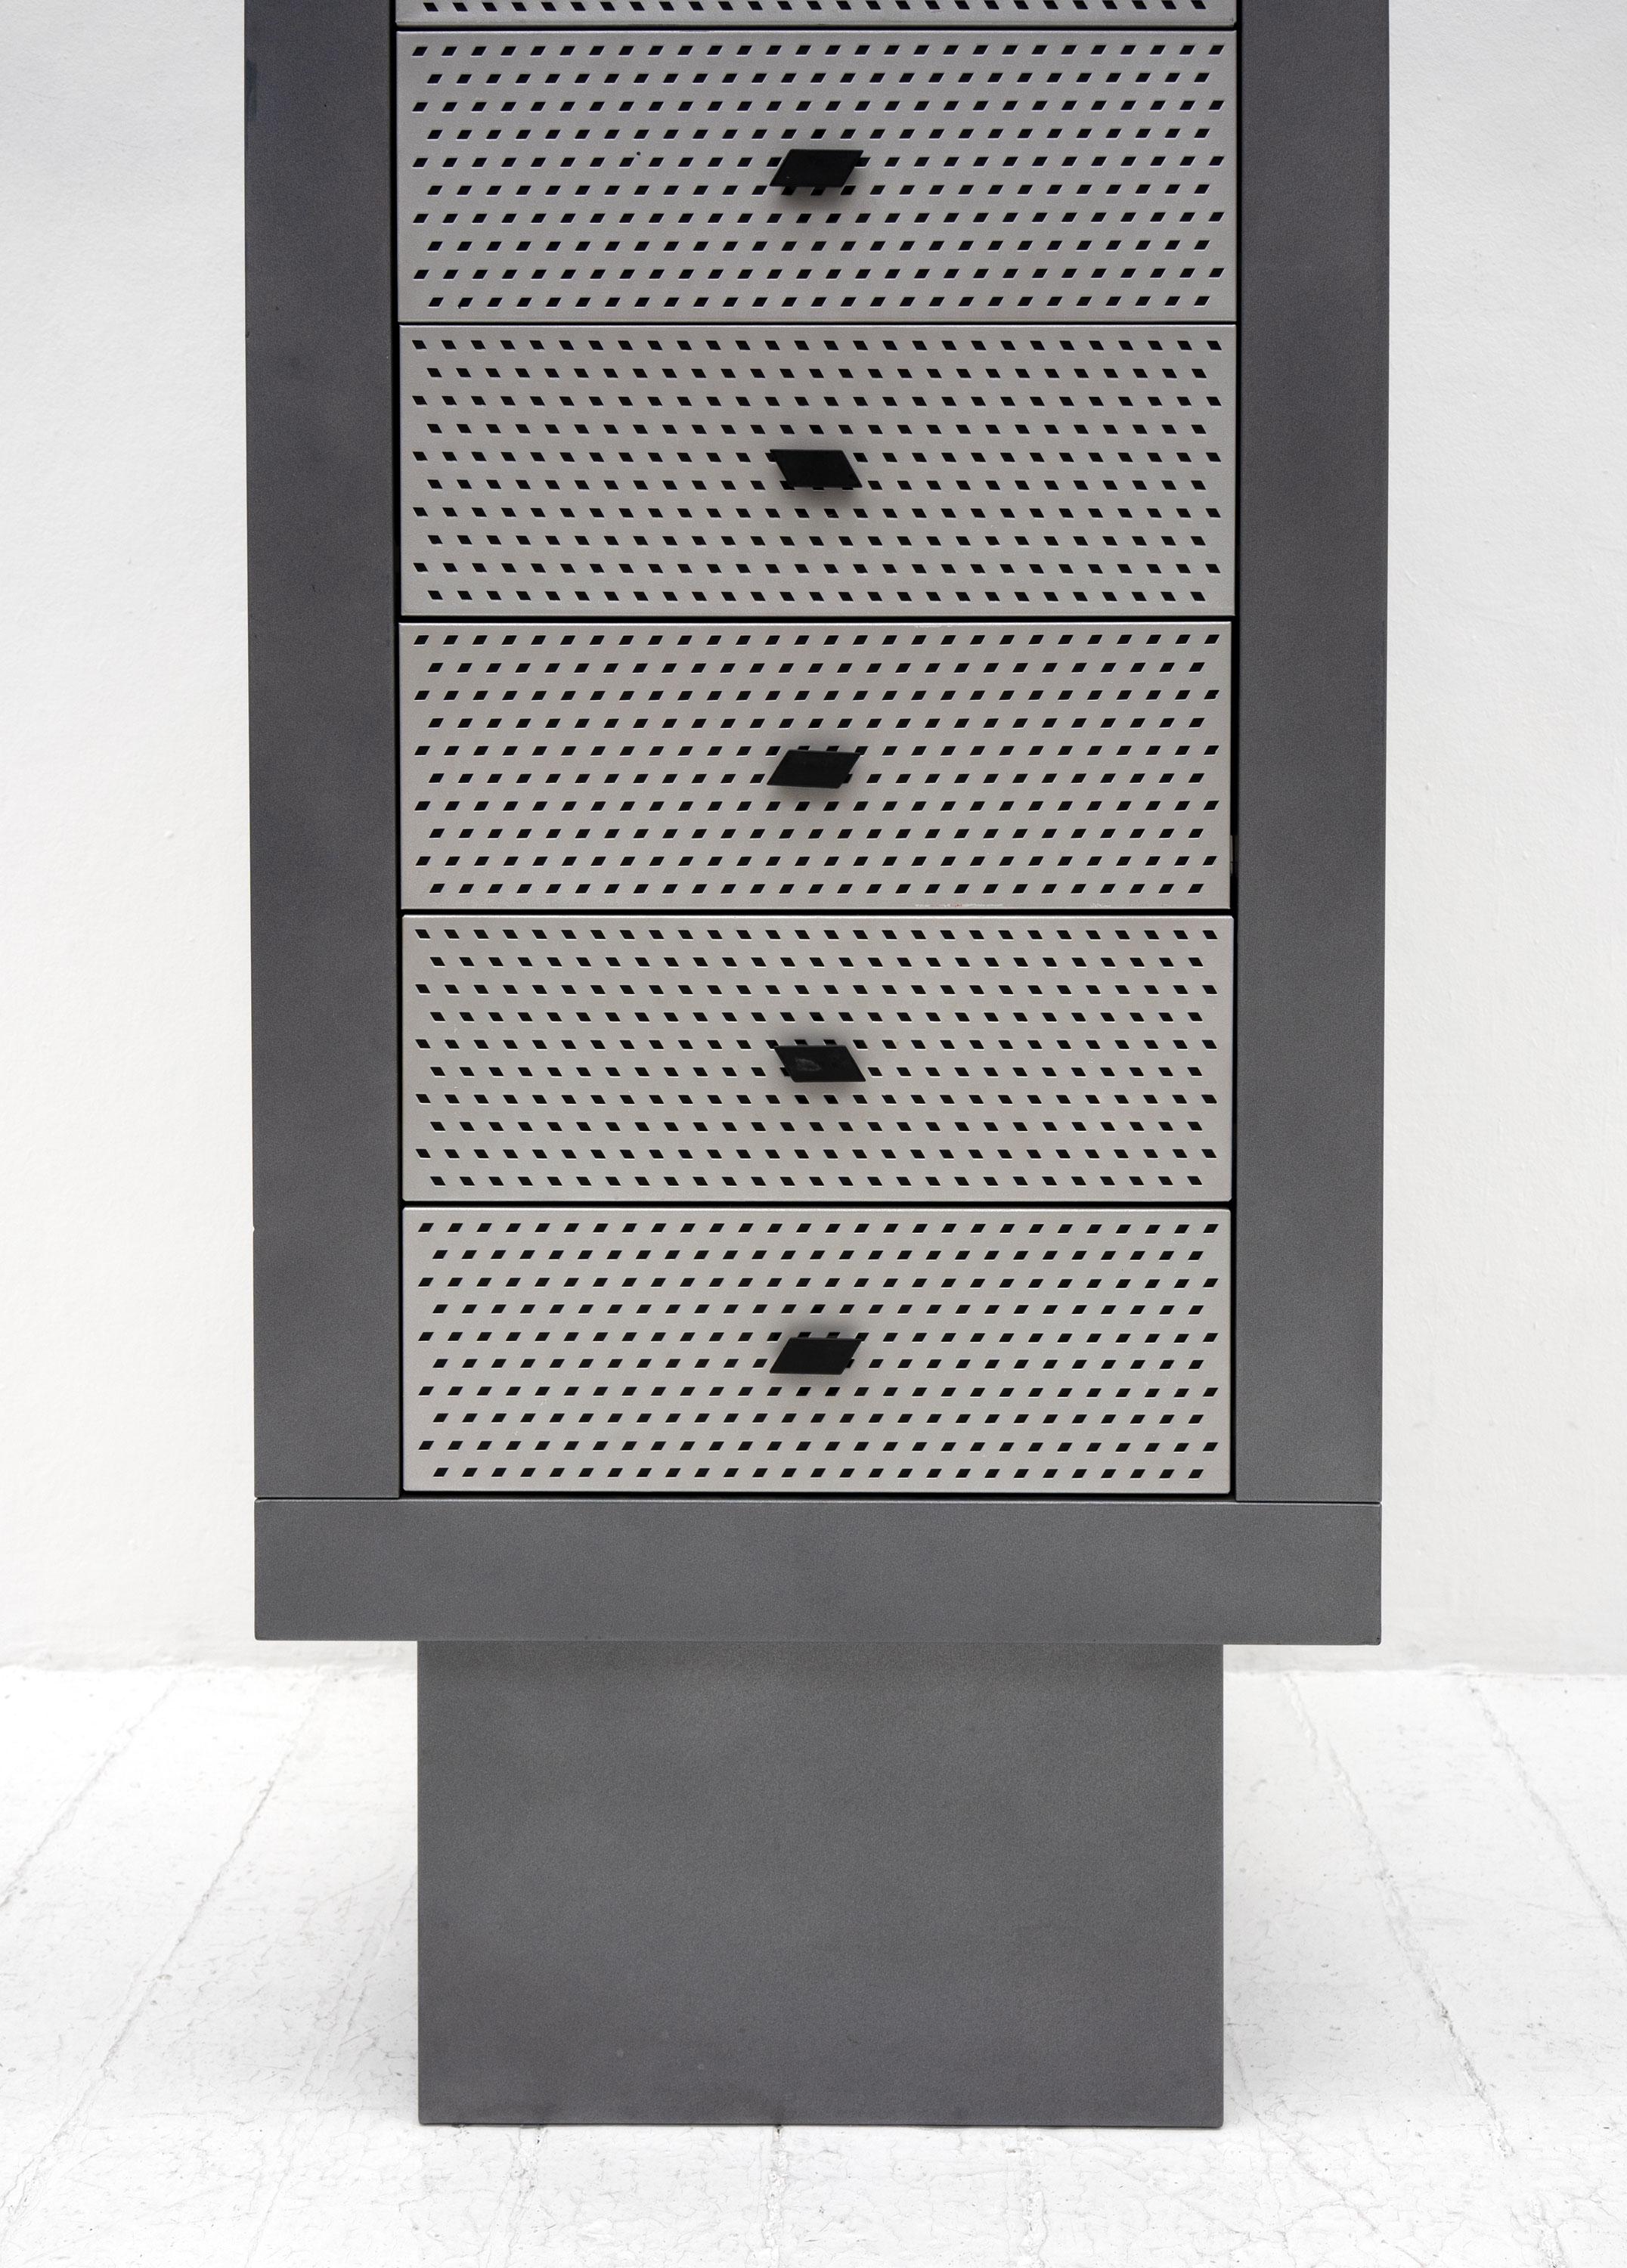 A 'Settimanale' chest of drawers designed by Matteo Thun and produced by Bieffeplast in small numbers in 1985. Composed from powder coated steel and featuring perforated drawer fronts and parallelogram shaped handles that alternate in direction.

A